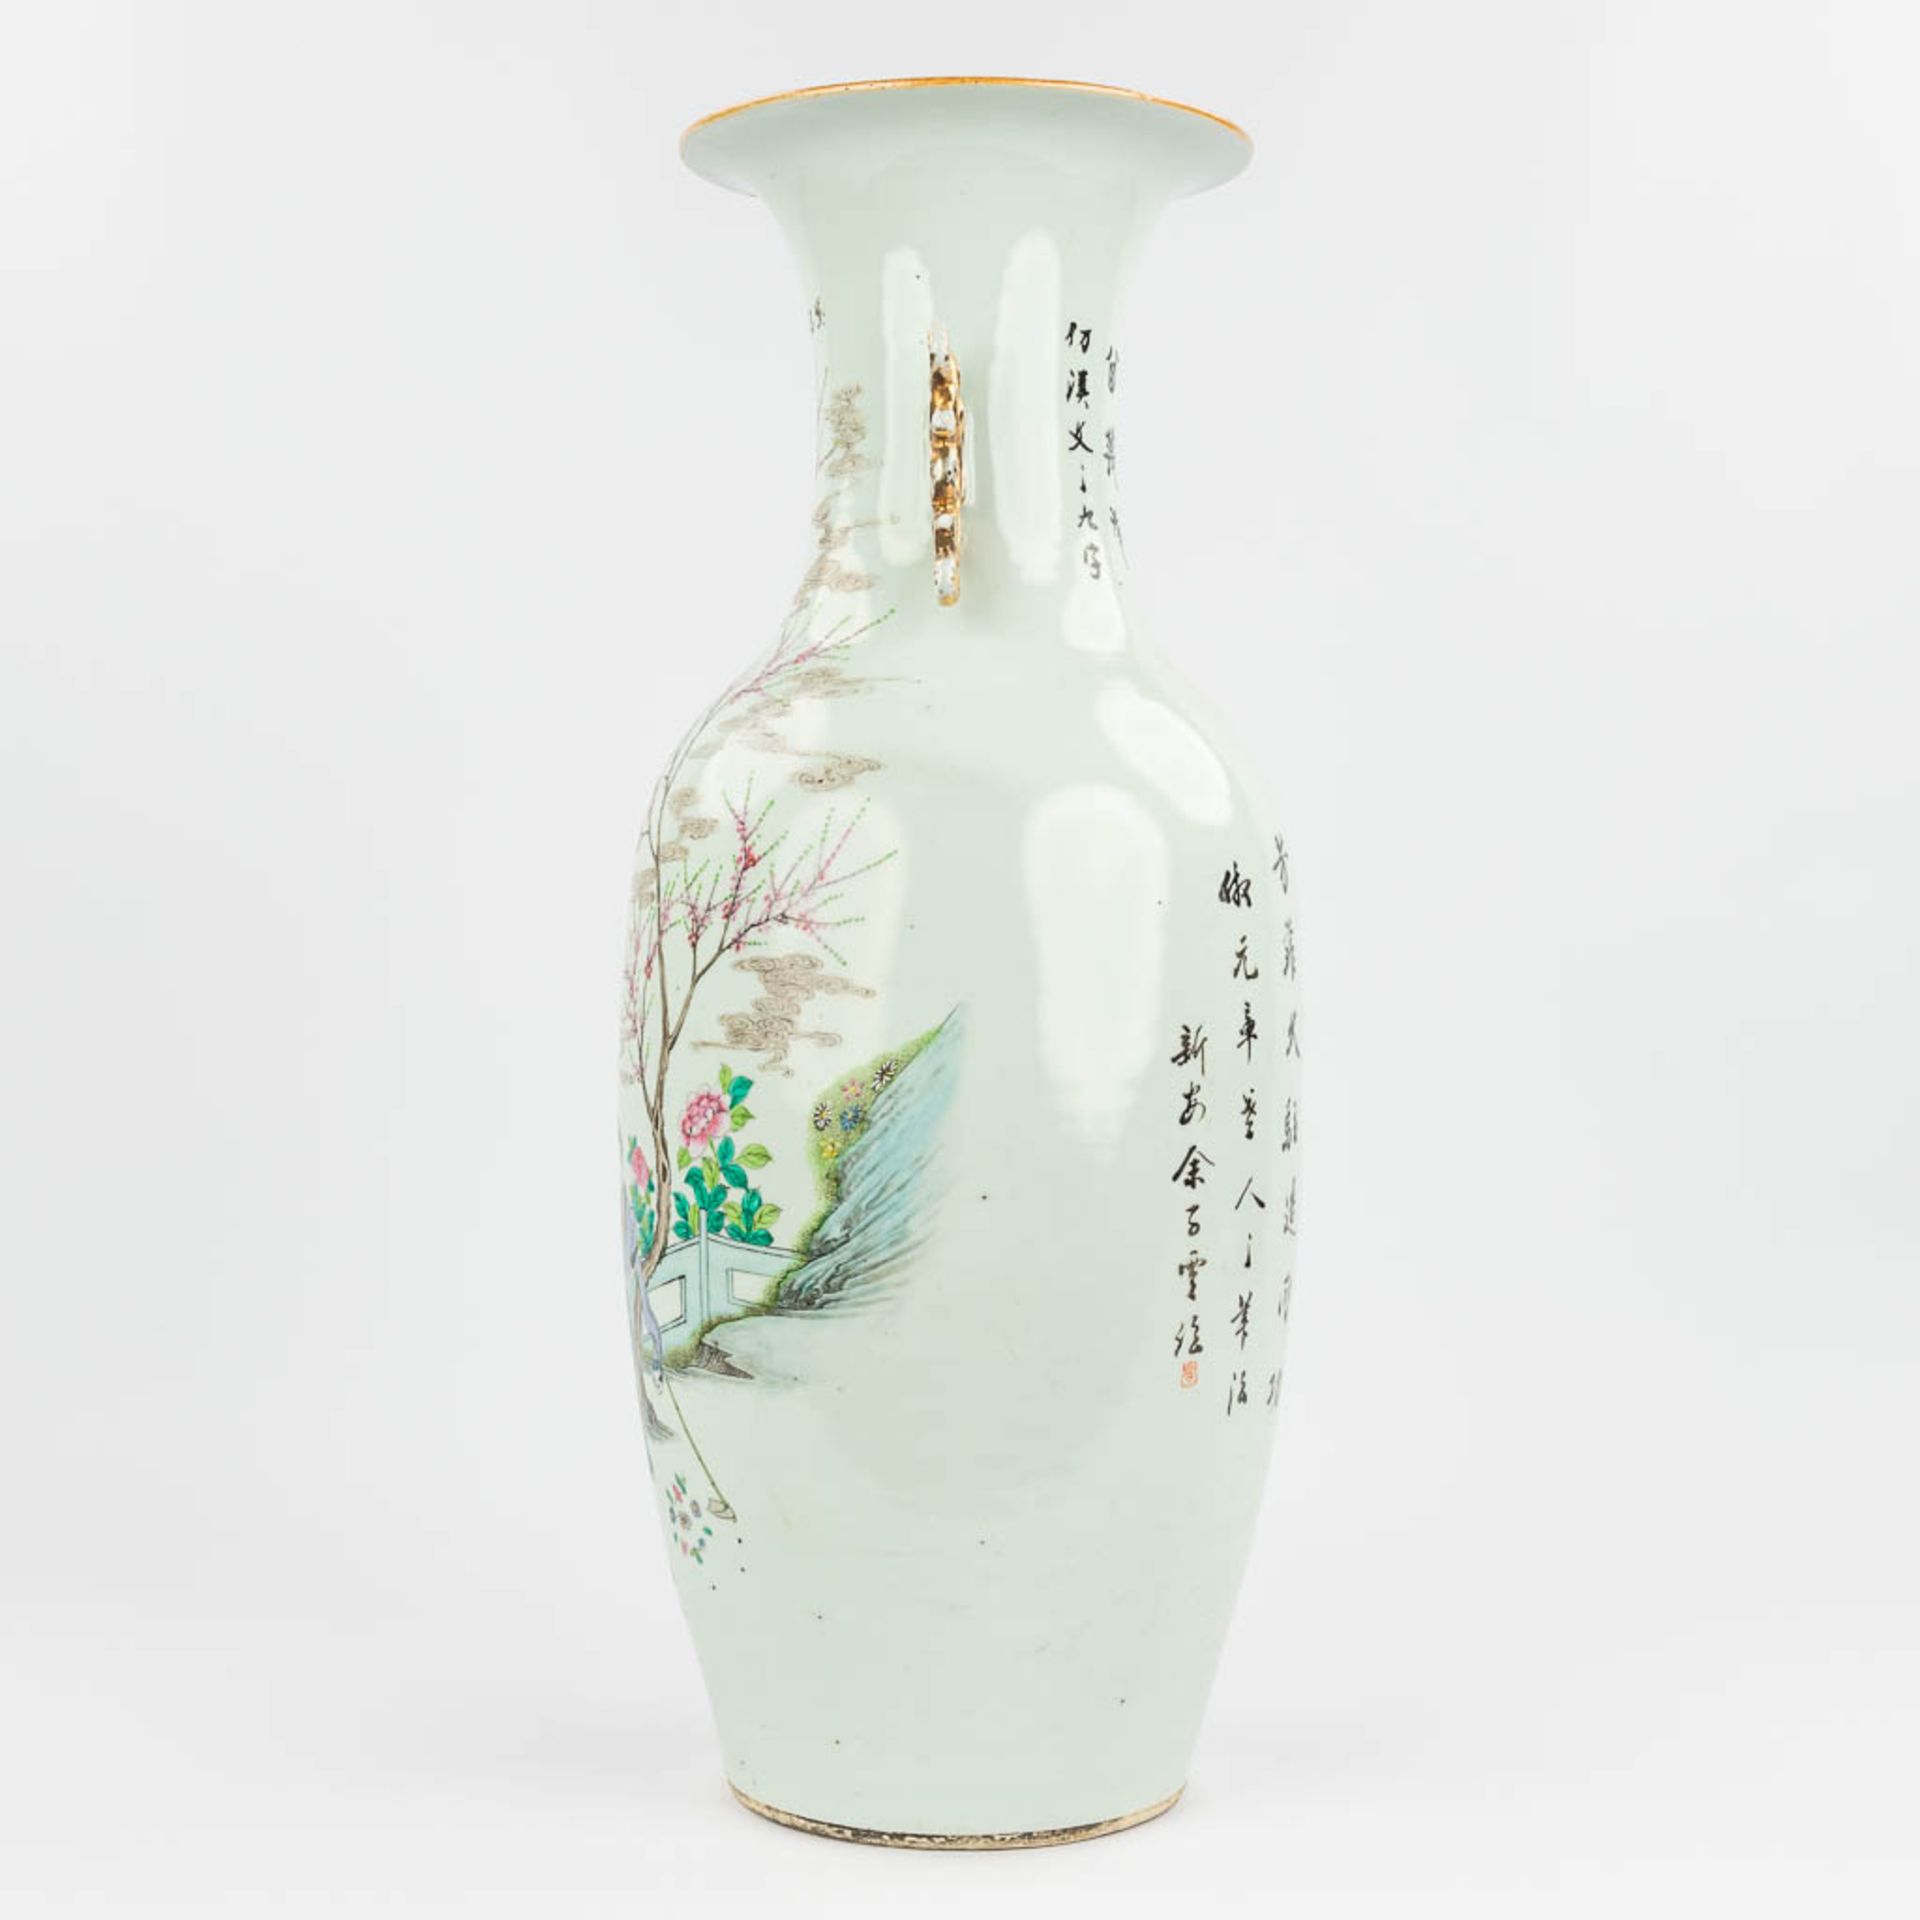 A Chinese vase made of porcelain andÊdecor of ladies near a large rock. (57,5 x 23 cm) - Image 3 of 13